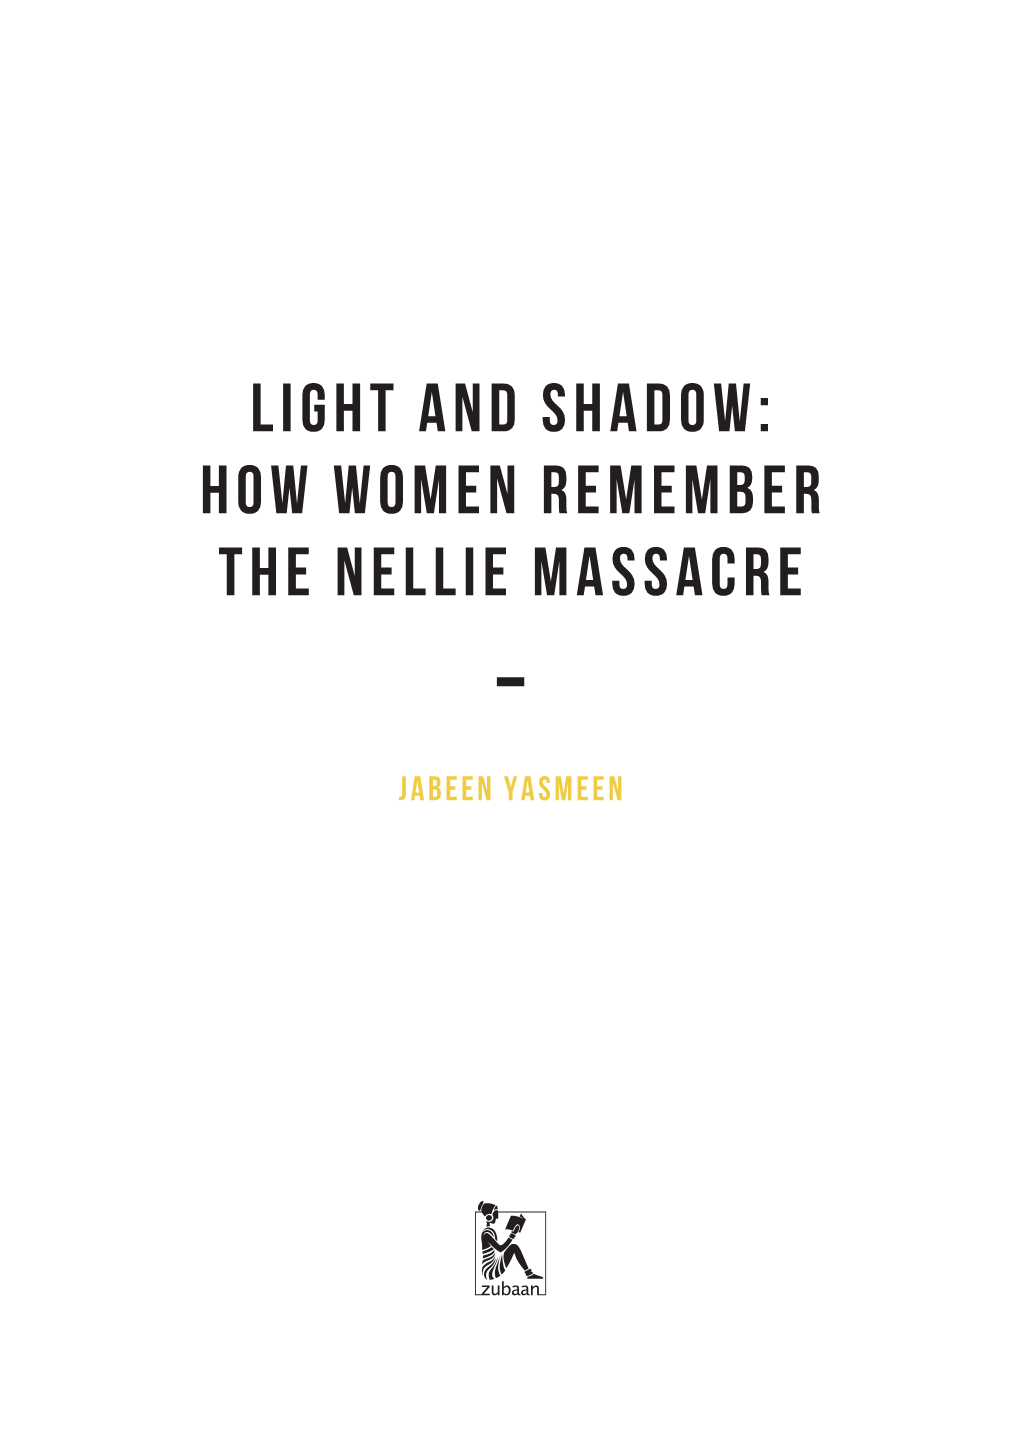 How Women Remember the Nellie Massacre By